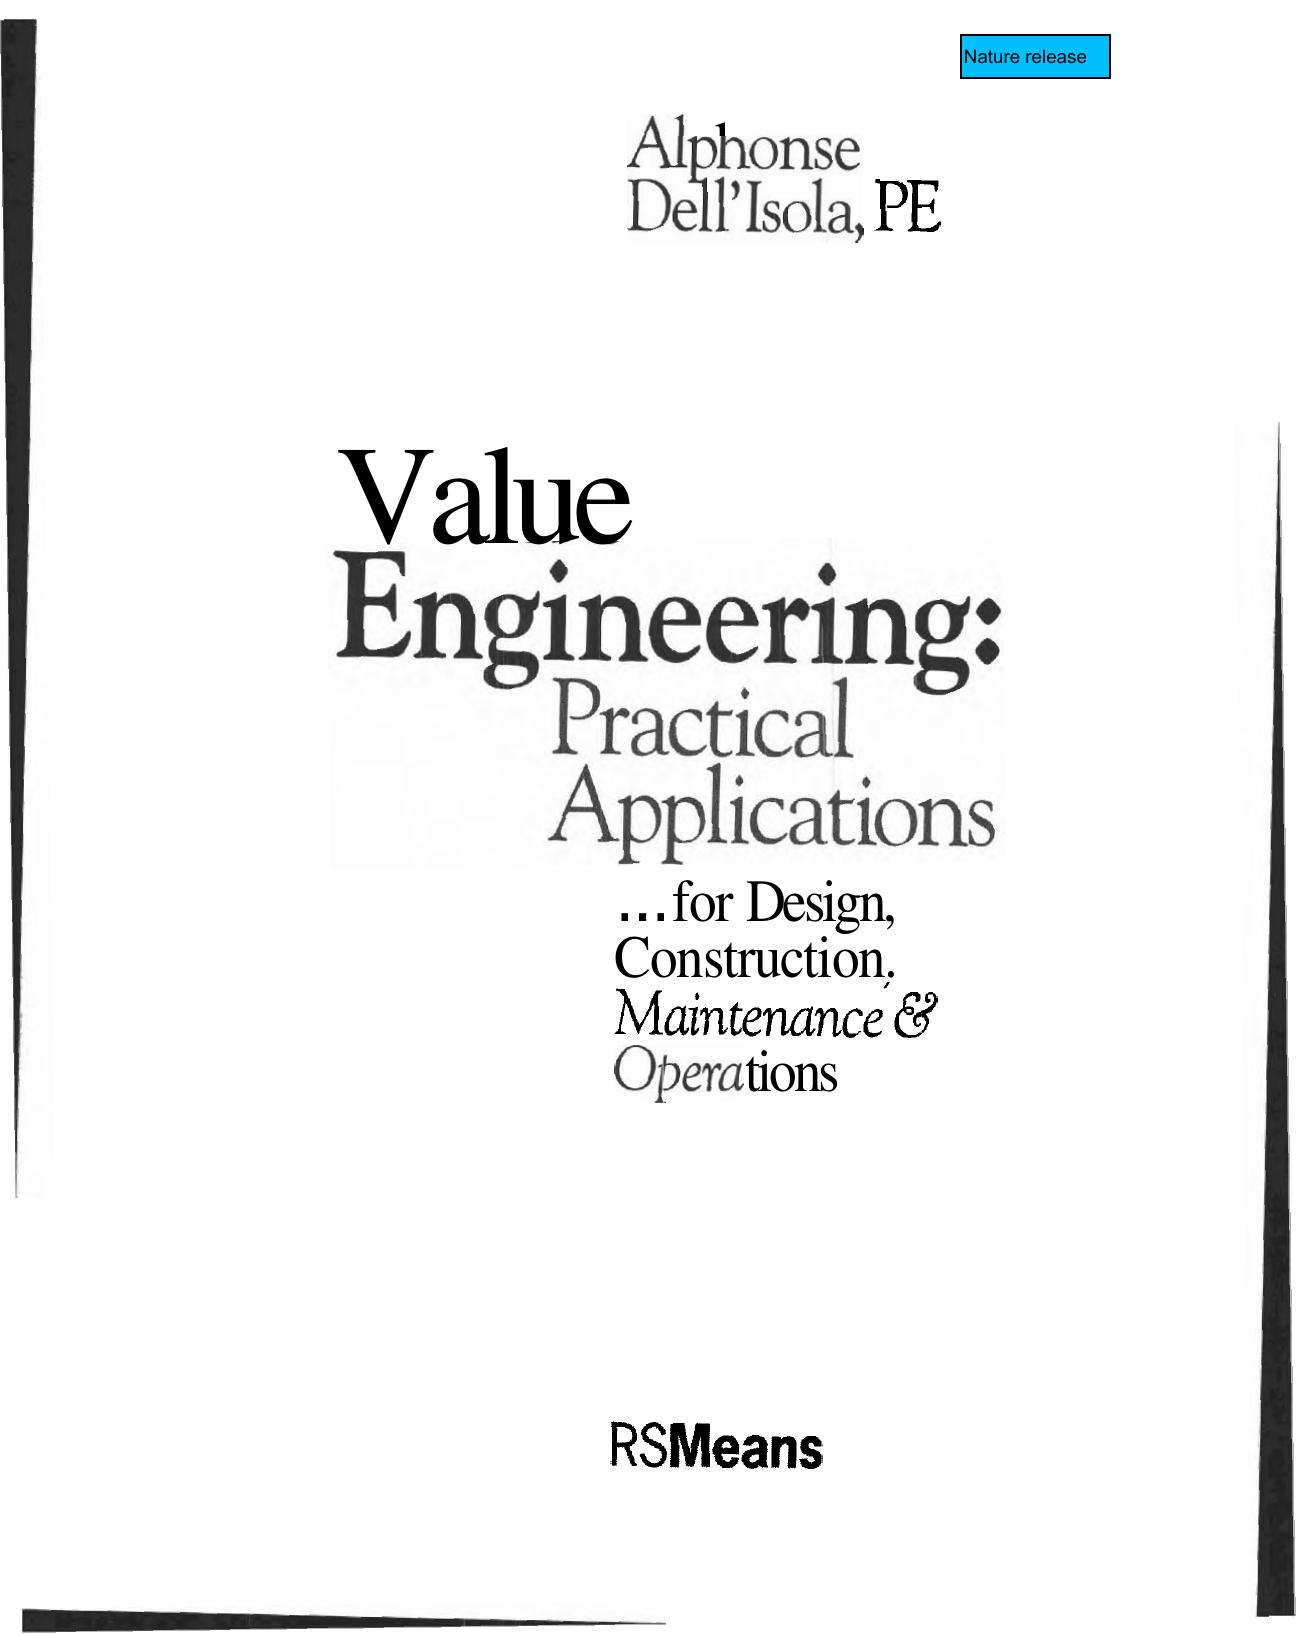 Alphonse DellIsola Value Engineering Practical Applications .for Design, Construction, Maintenance and Operations RSMeans  1997